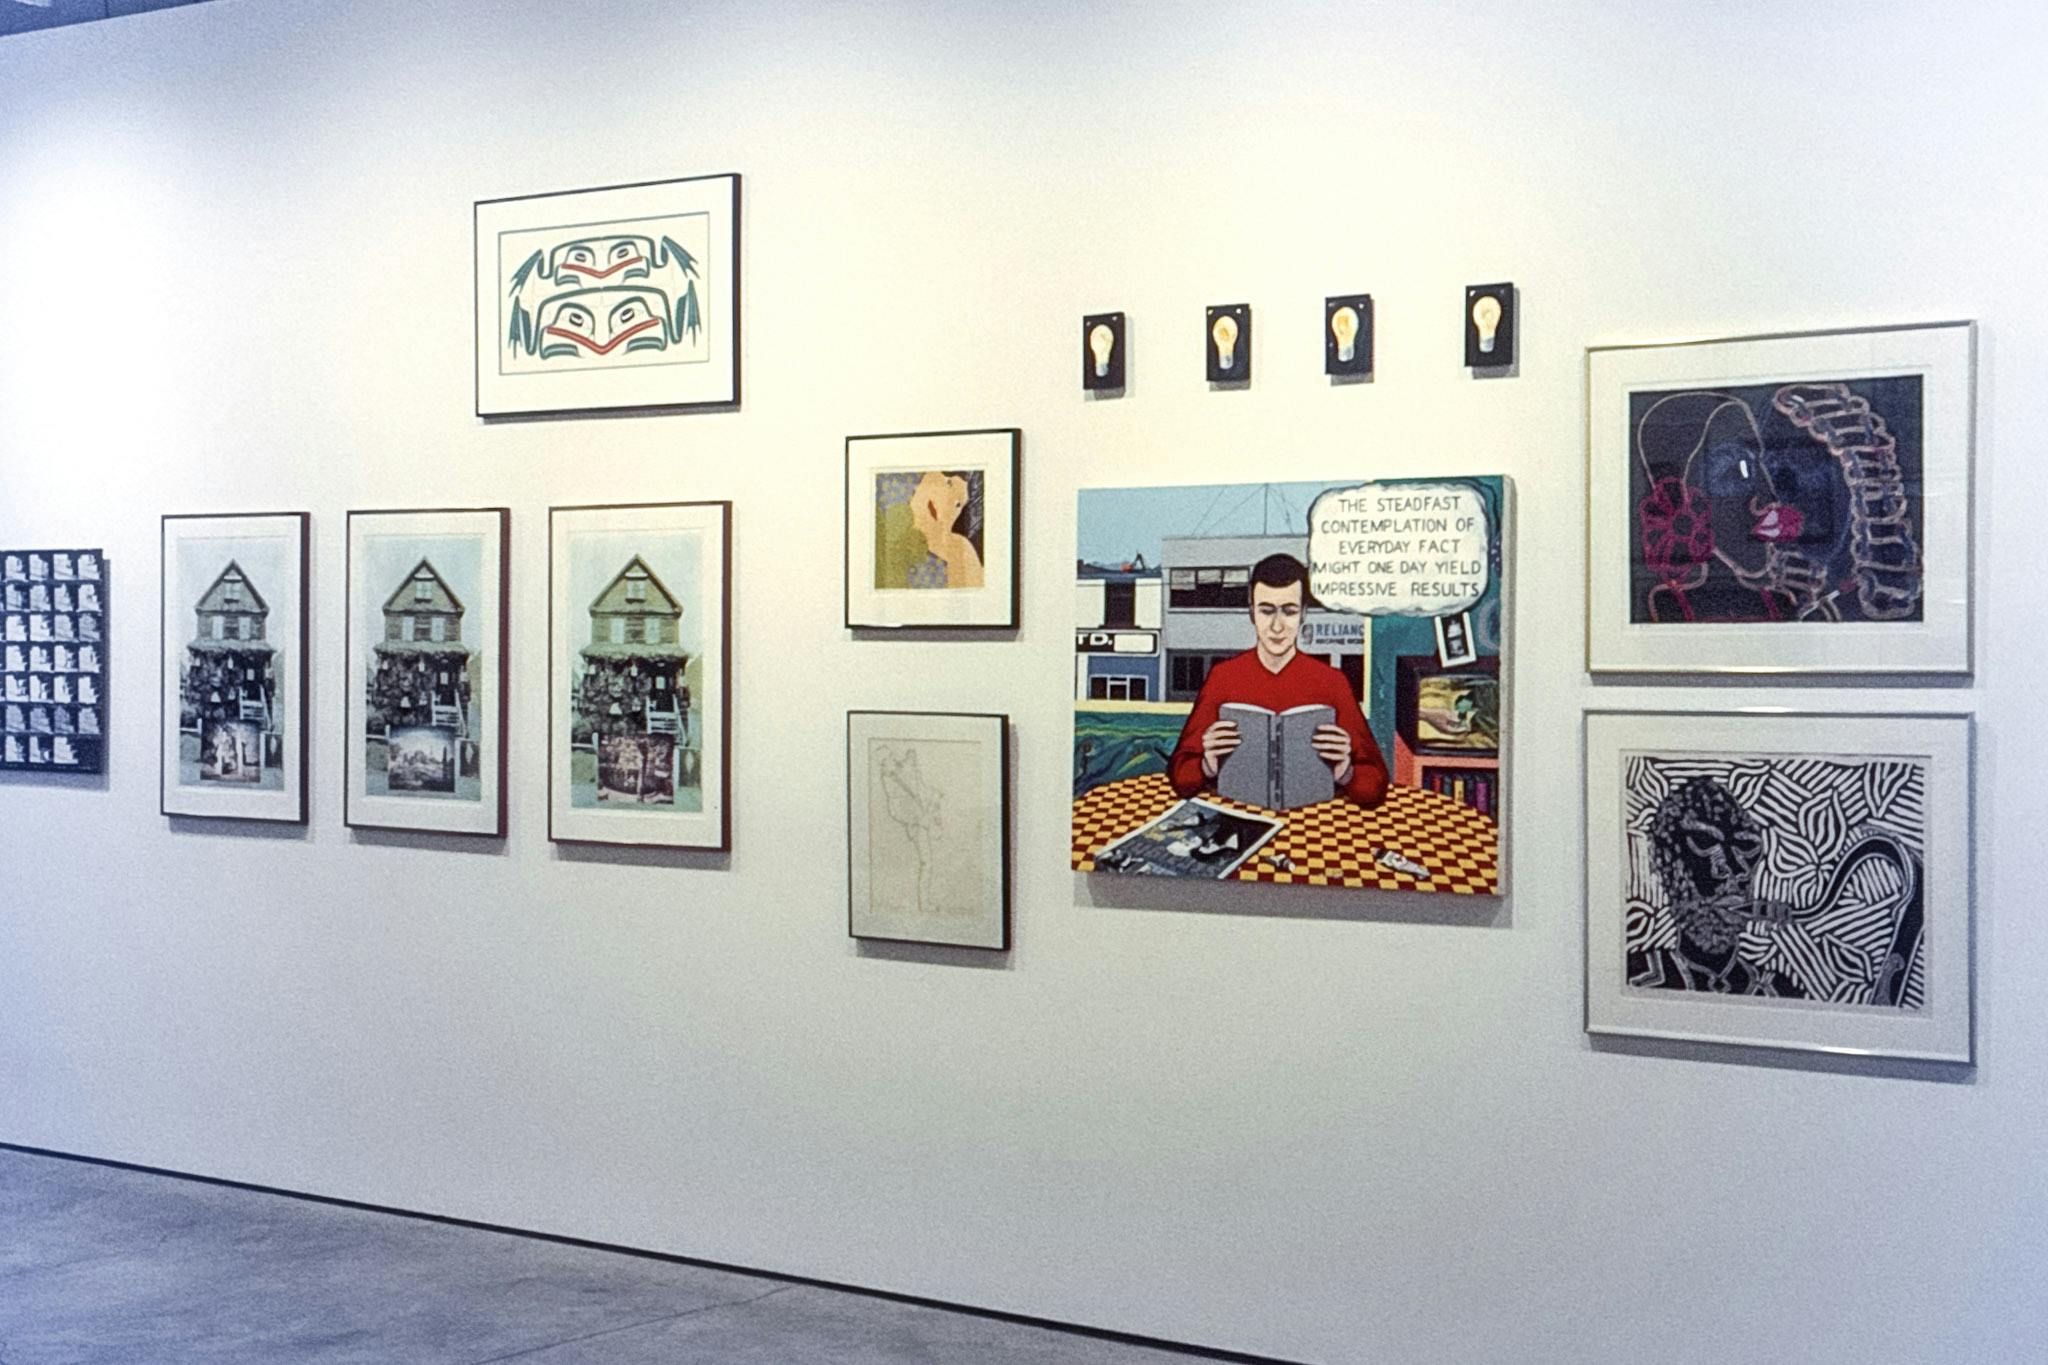 A photo of various artworks mounted on a gallery wall. One painting depicts a man reading a book and thinking, “The steadfast contemplation of everyday fact might one day yield impressive results.”  